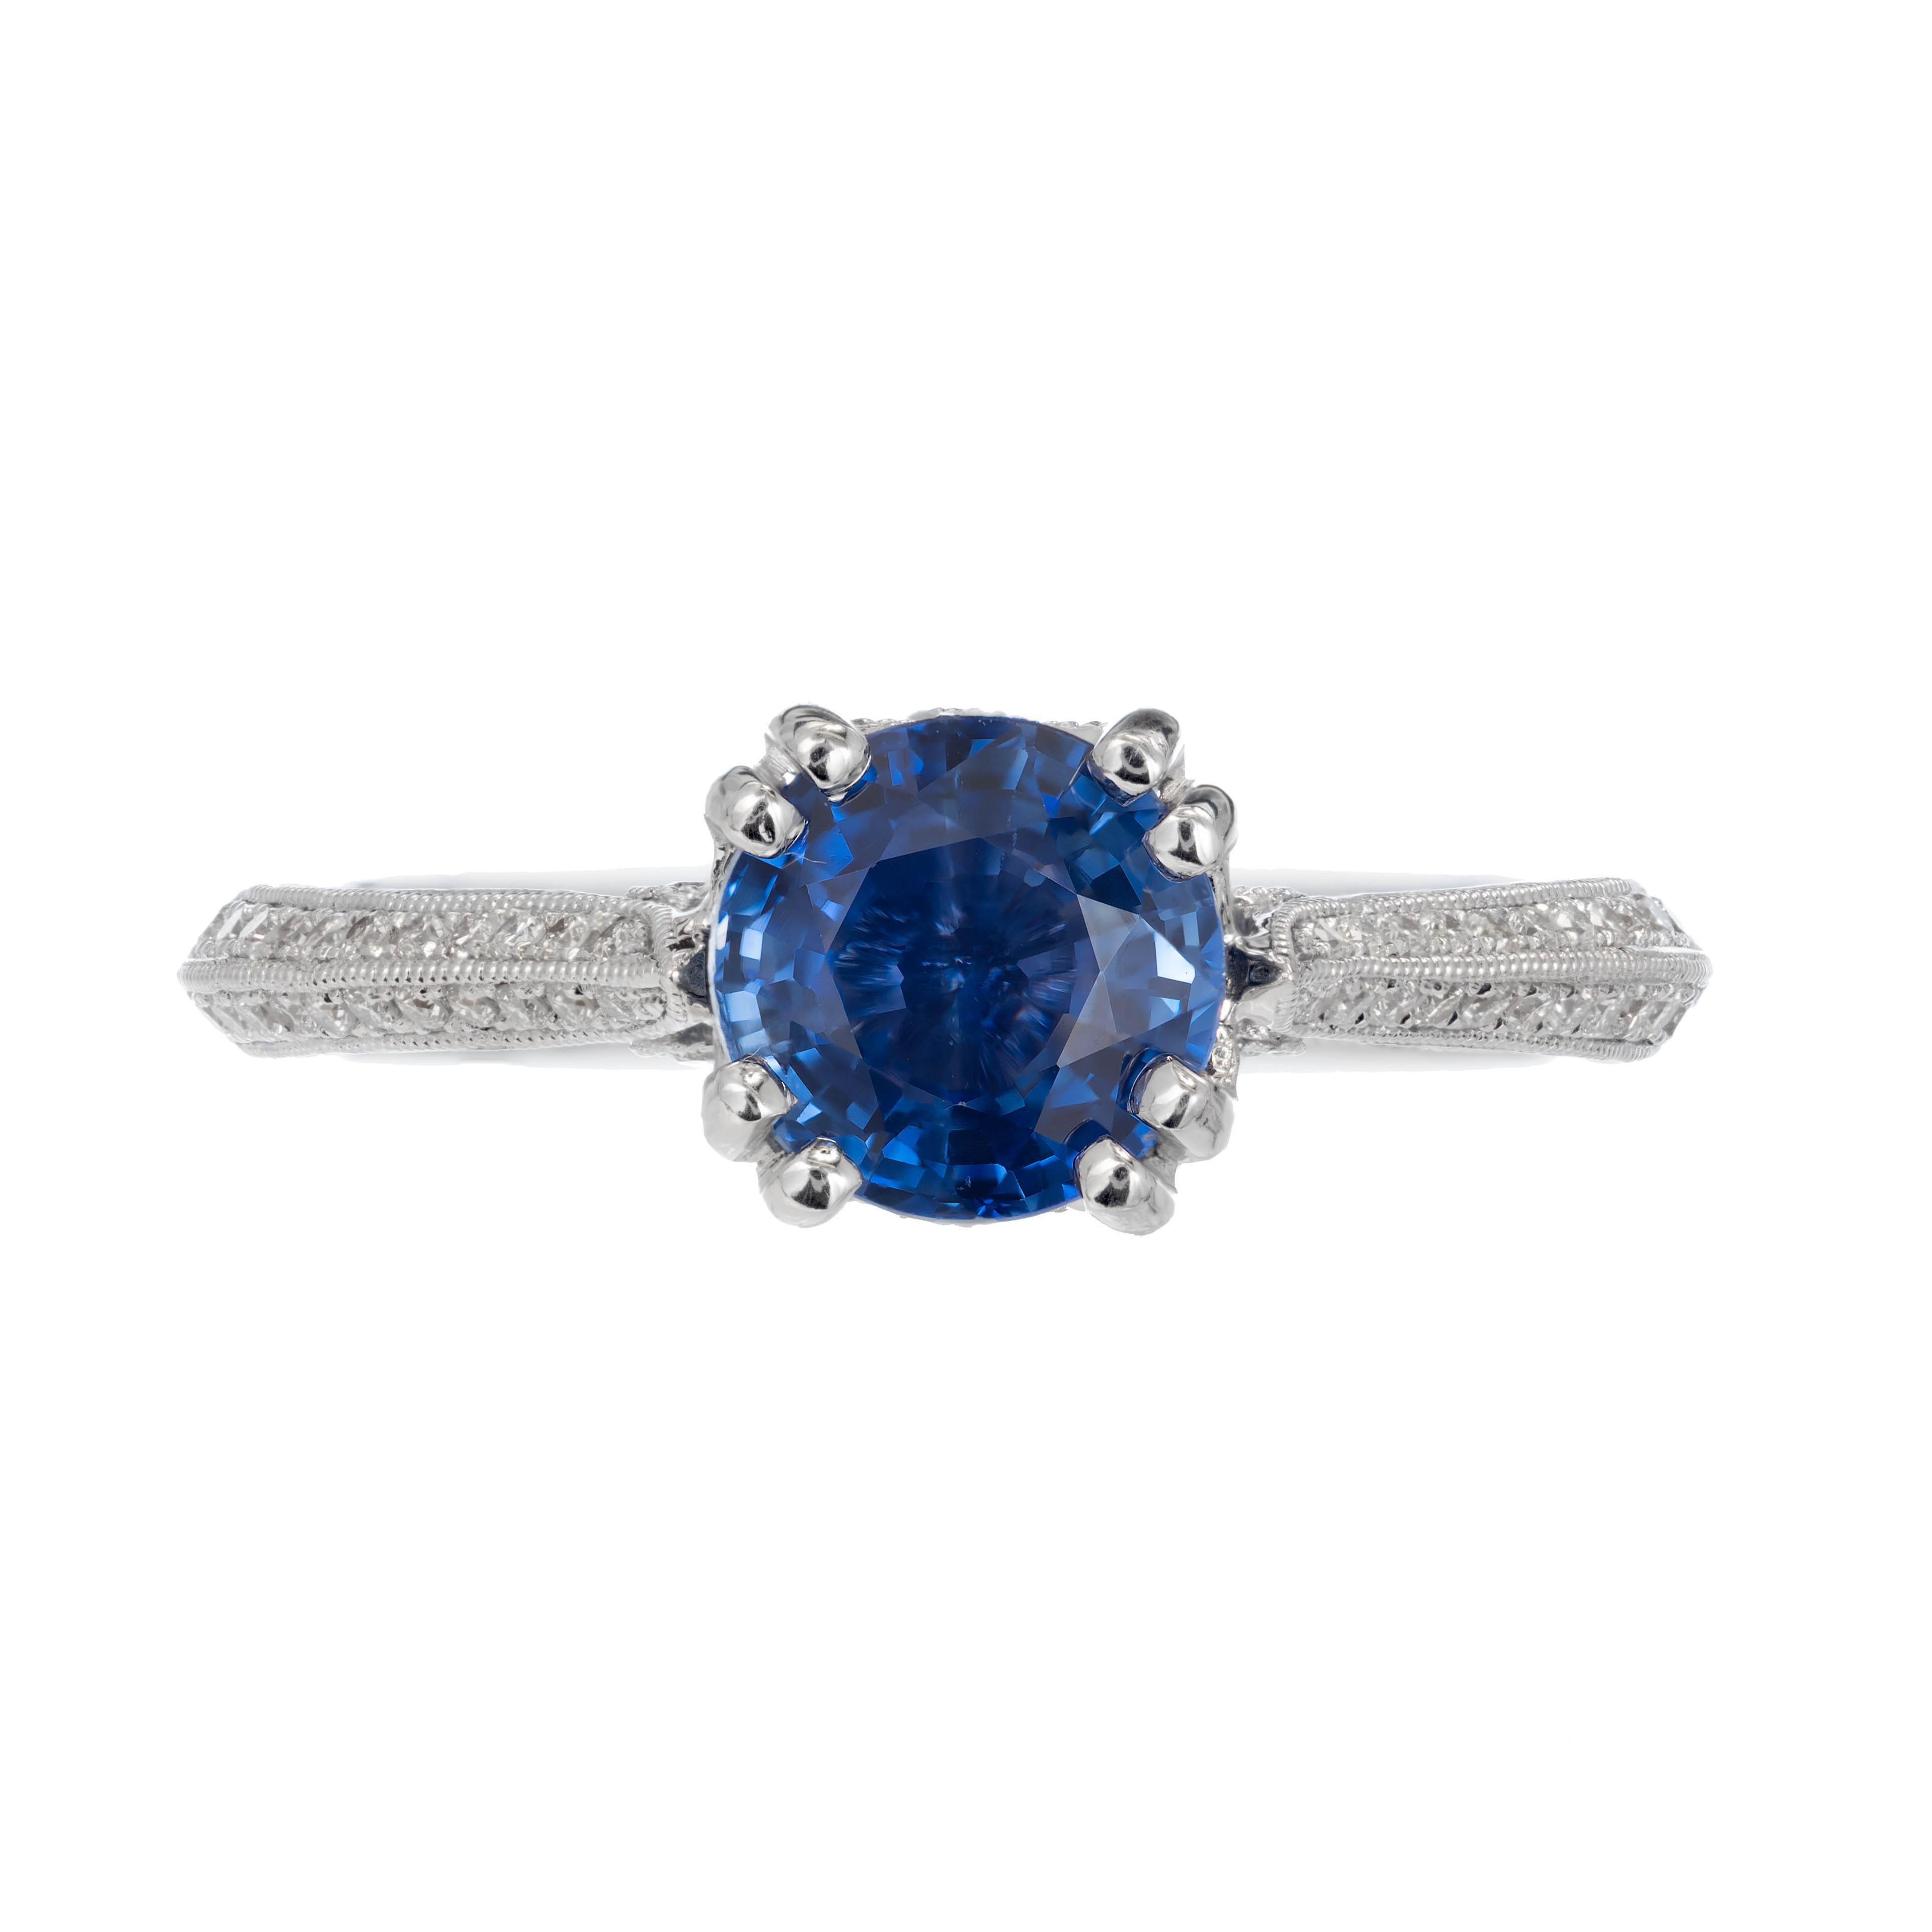 14k White gold sapphire and diamond engagement ring. Bright blue round sapphire is set in 14k white gold double prong head with mil-grain design. Bezel set with round diamonds on each side. The band consists of two rows of pave set diamonds